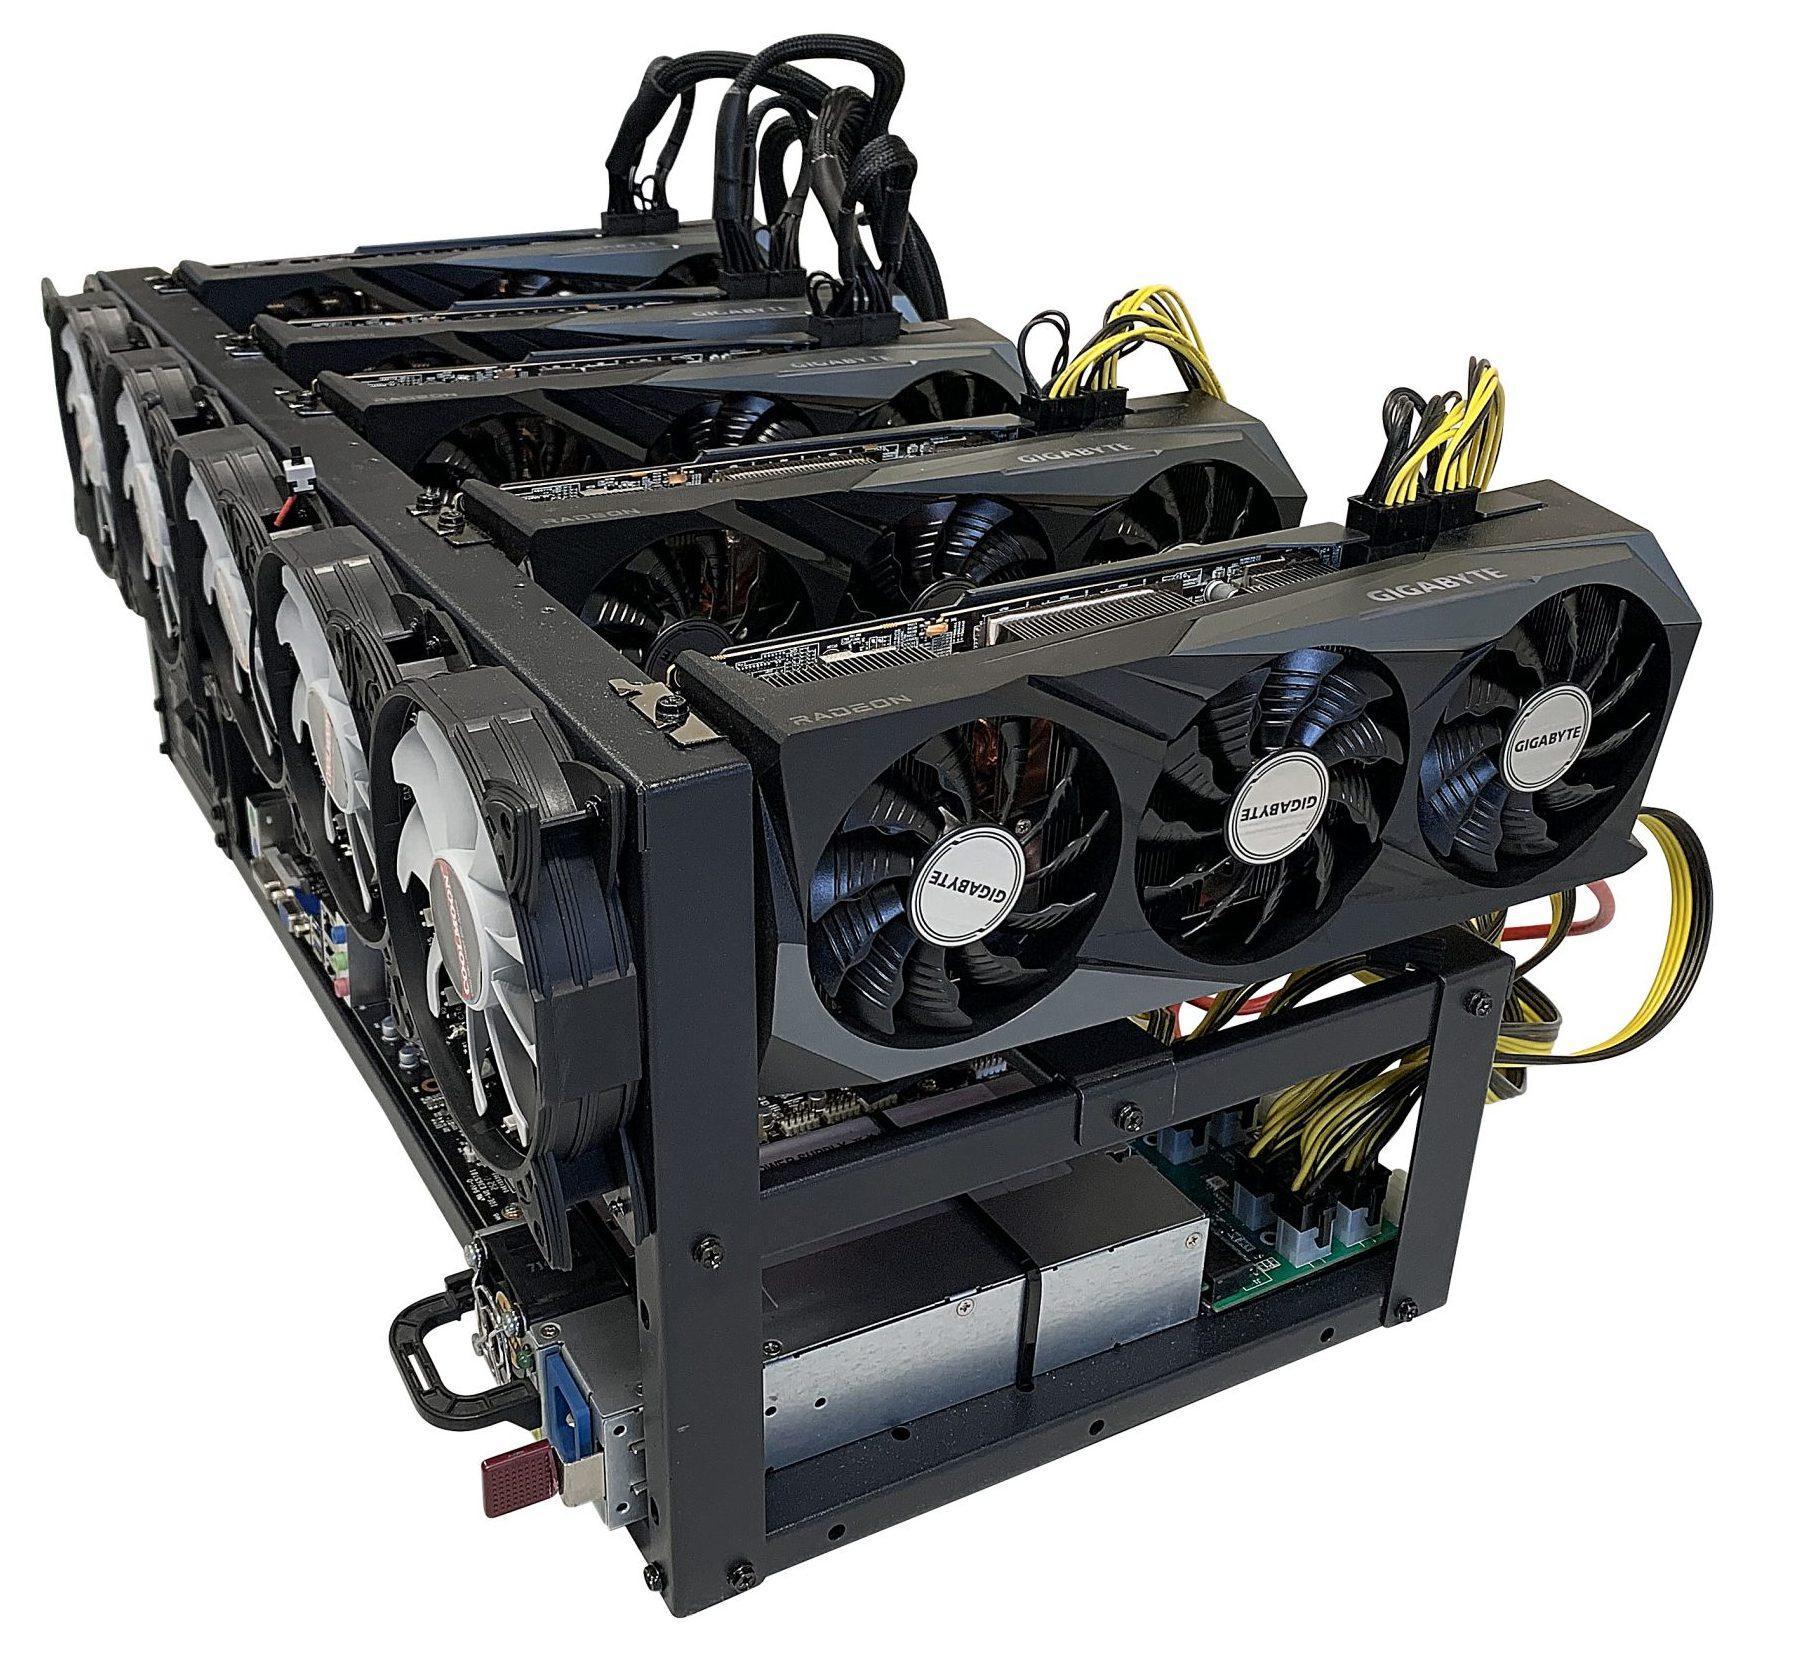 Cryptominer Frieza 304 MH/s - Miners Nederland